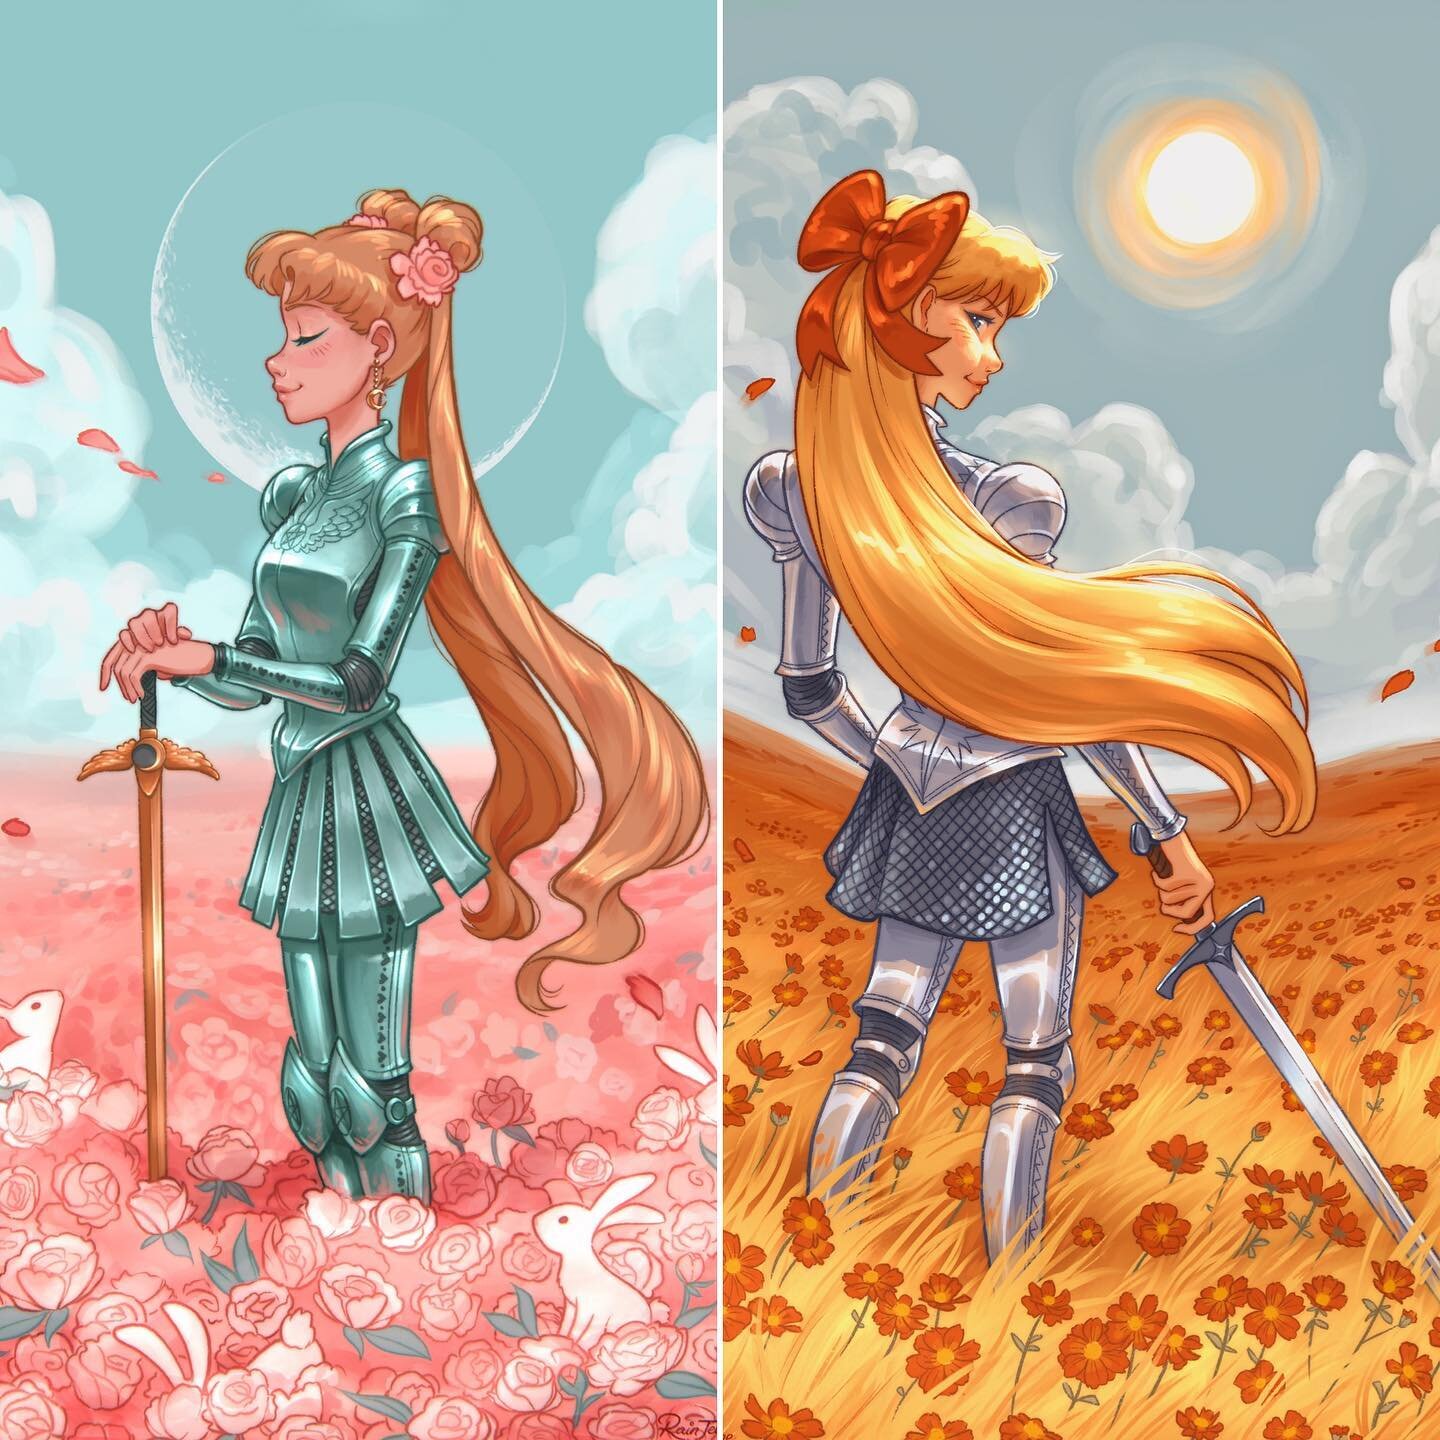 A couple of Sailor Knights! Which do you prefer here, Sailor Moon or Sailor Venus? 🌙 ☀️ 
.
These are actually for the @sailormoontarotdeck as prints! I also got to make my first ever PIN! 💕ｏ(≧▽≦)ｏ✨💕If you&rsquo;re interested, they&rsquo;ve got pre